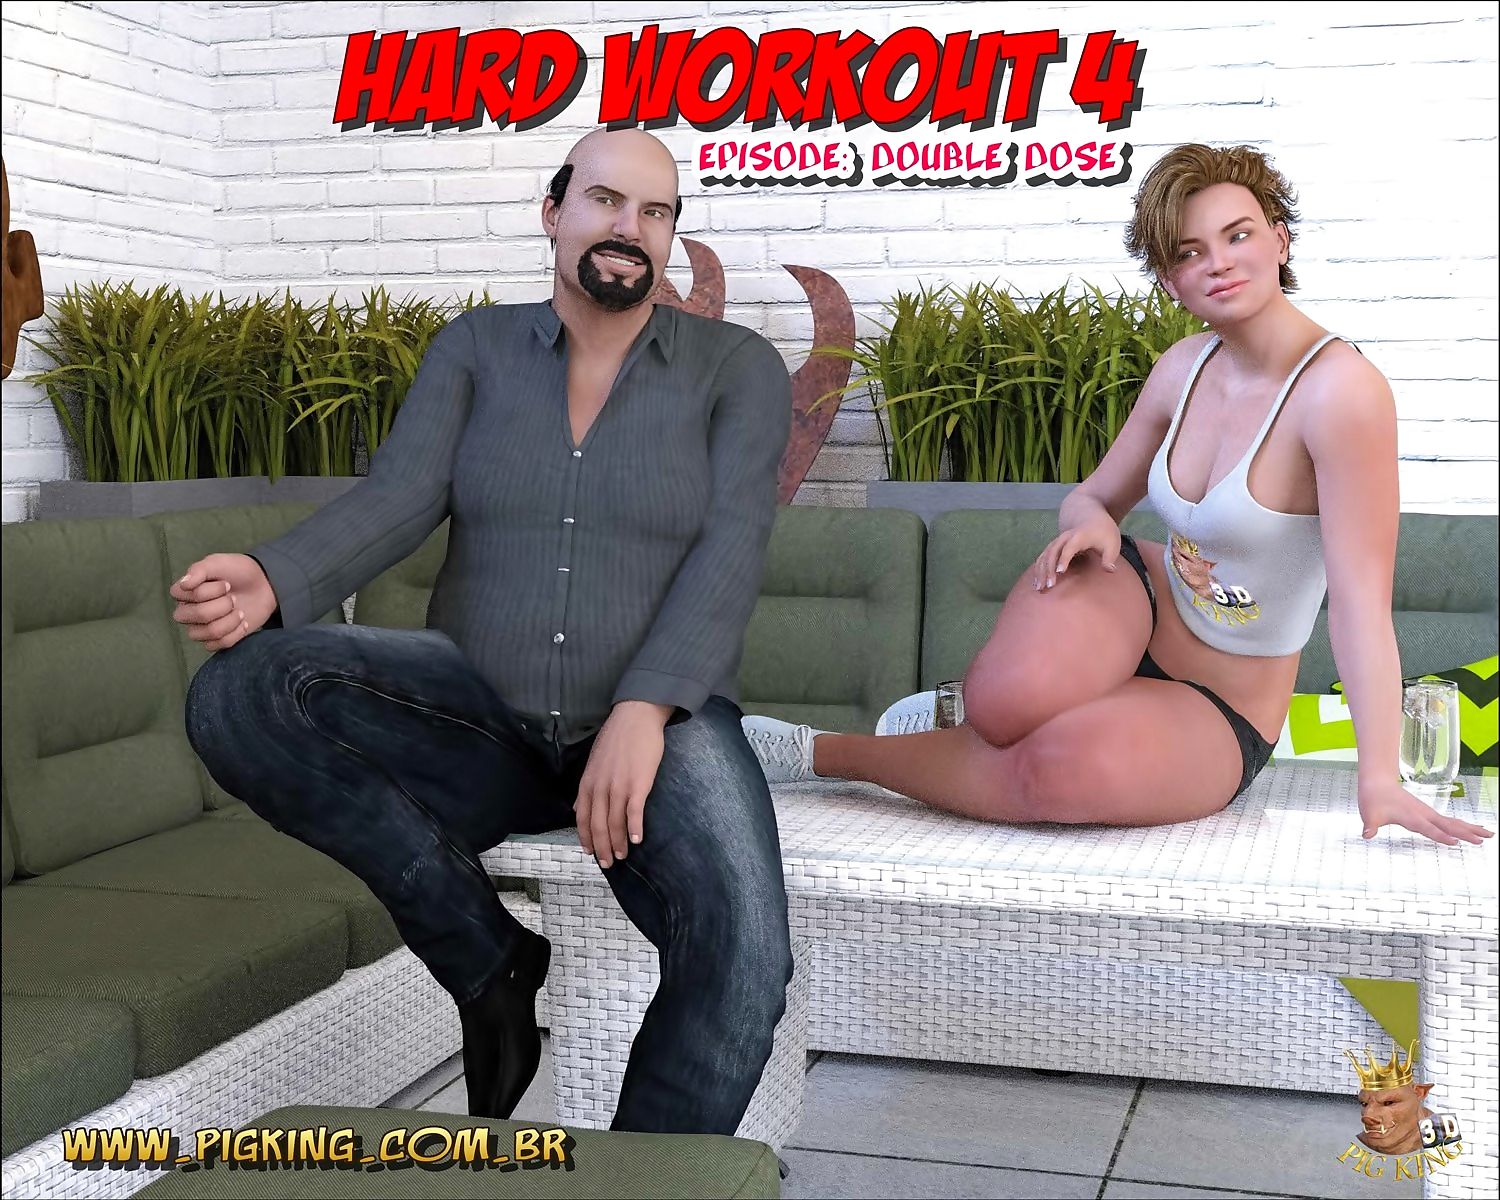 Pig King- Hard Workout 4 Double Dose page 1